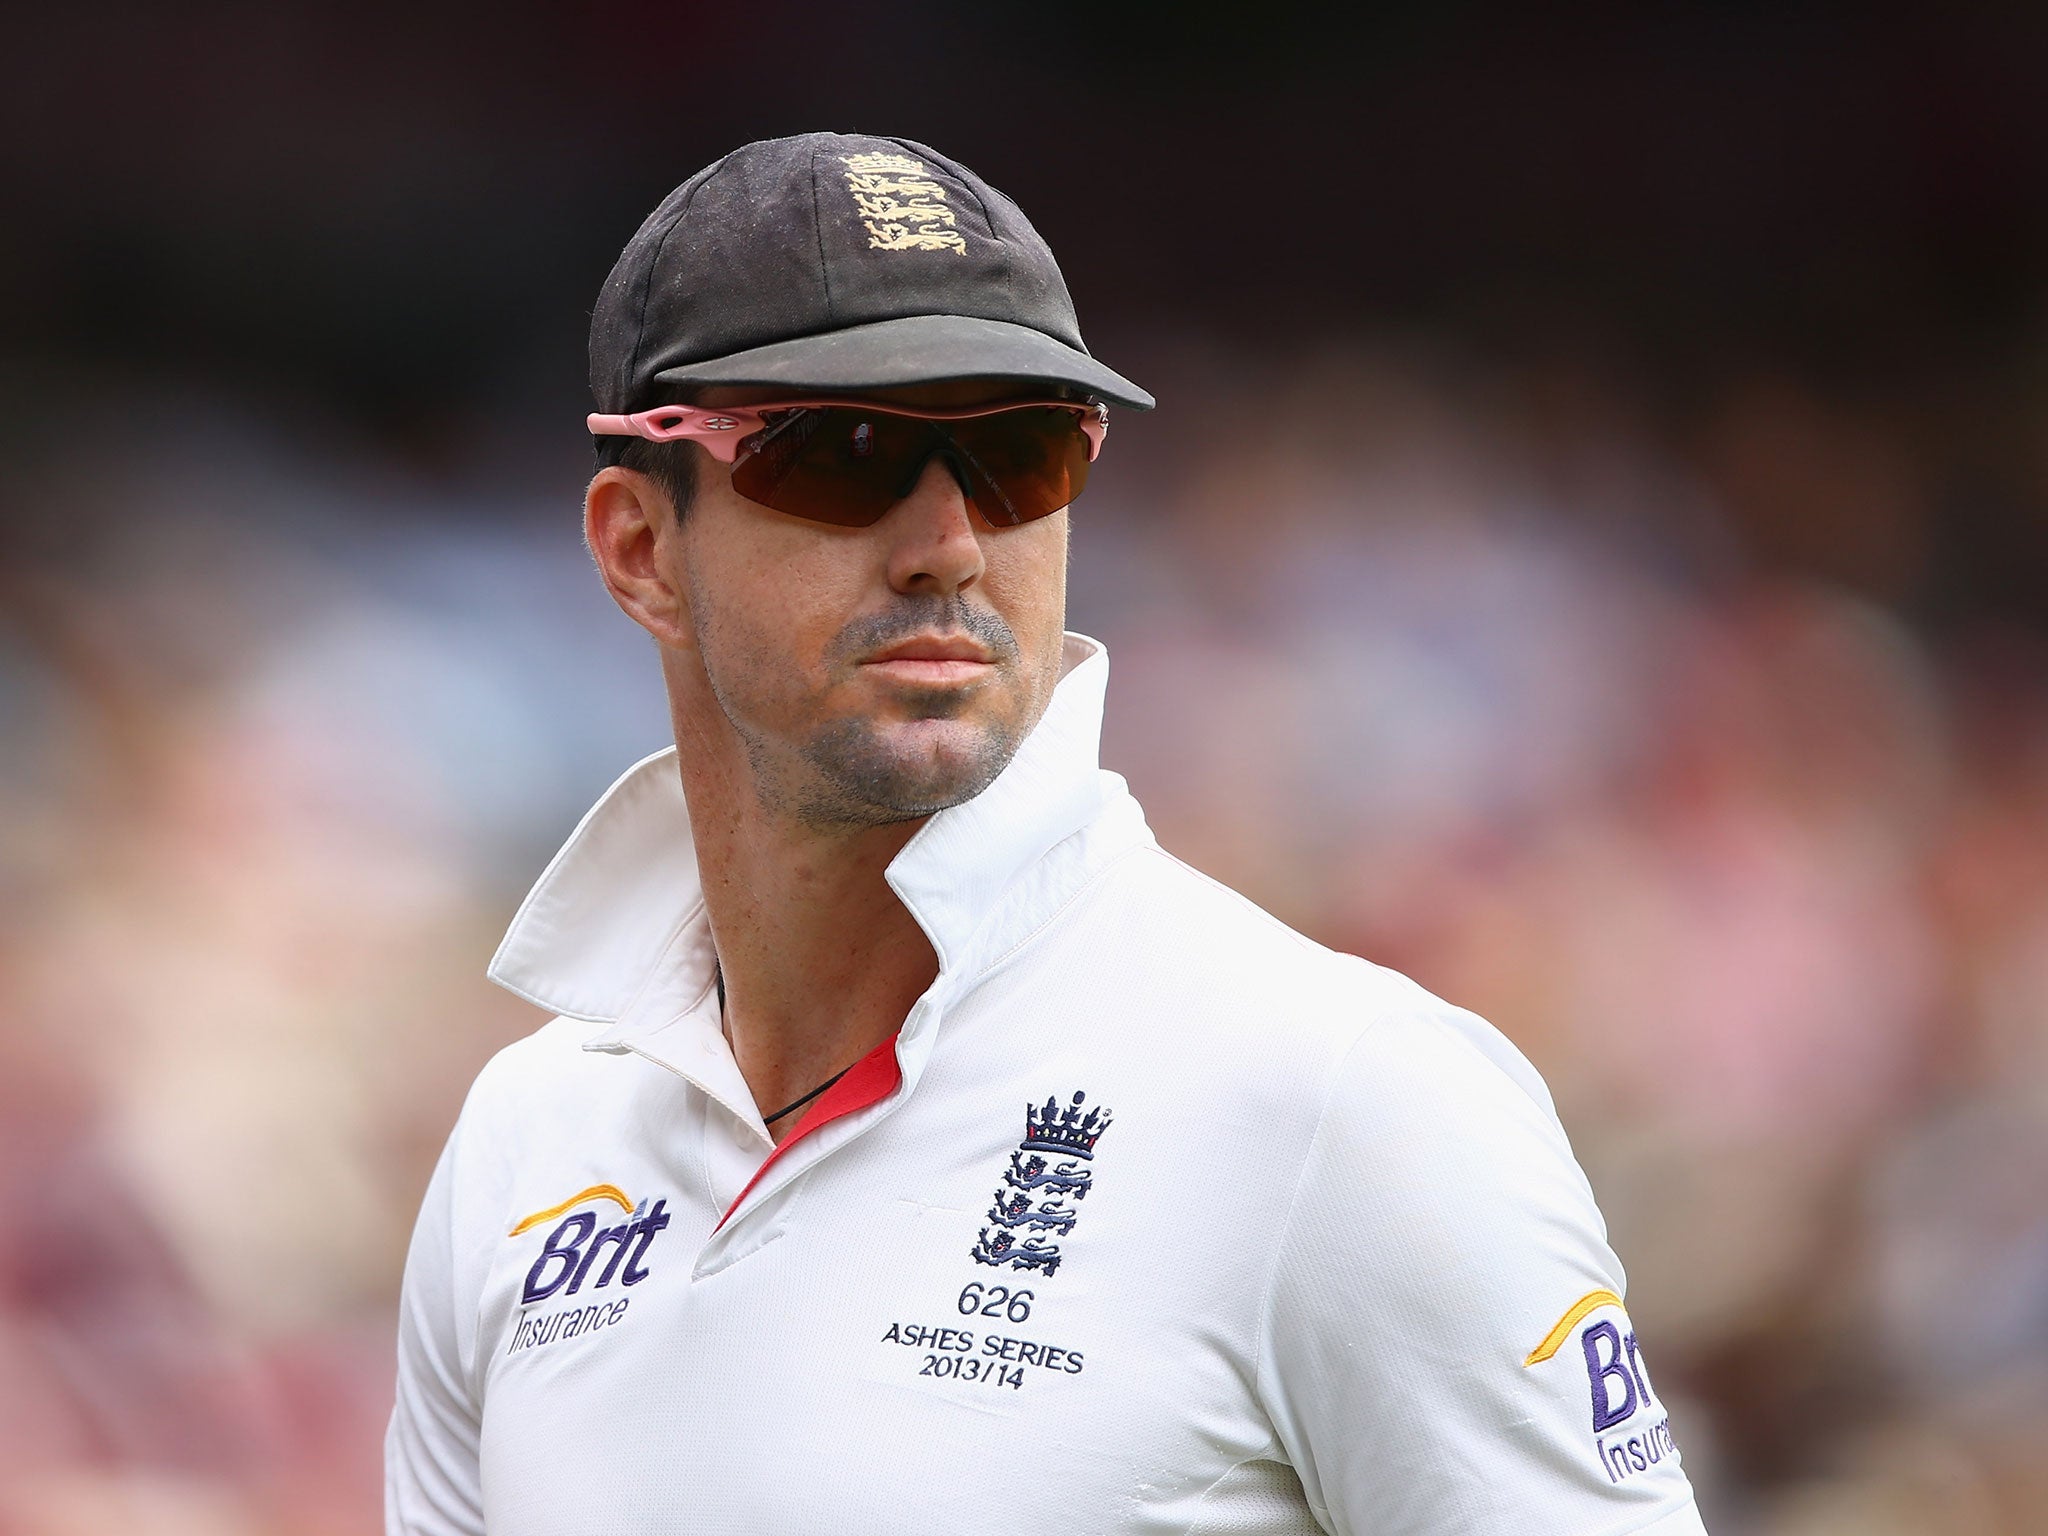 Talk of recalling Kevin Pietersen is a red herring
that cannot help the revival of English cricket